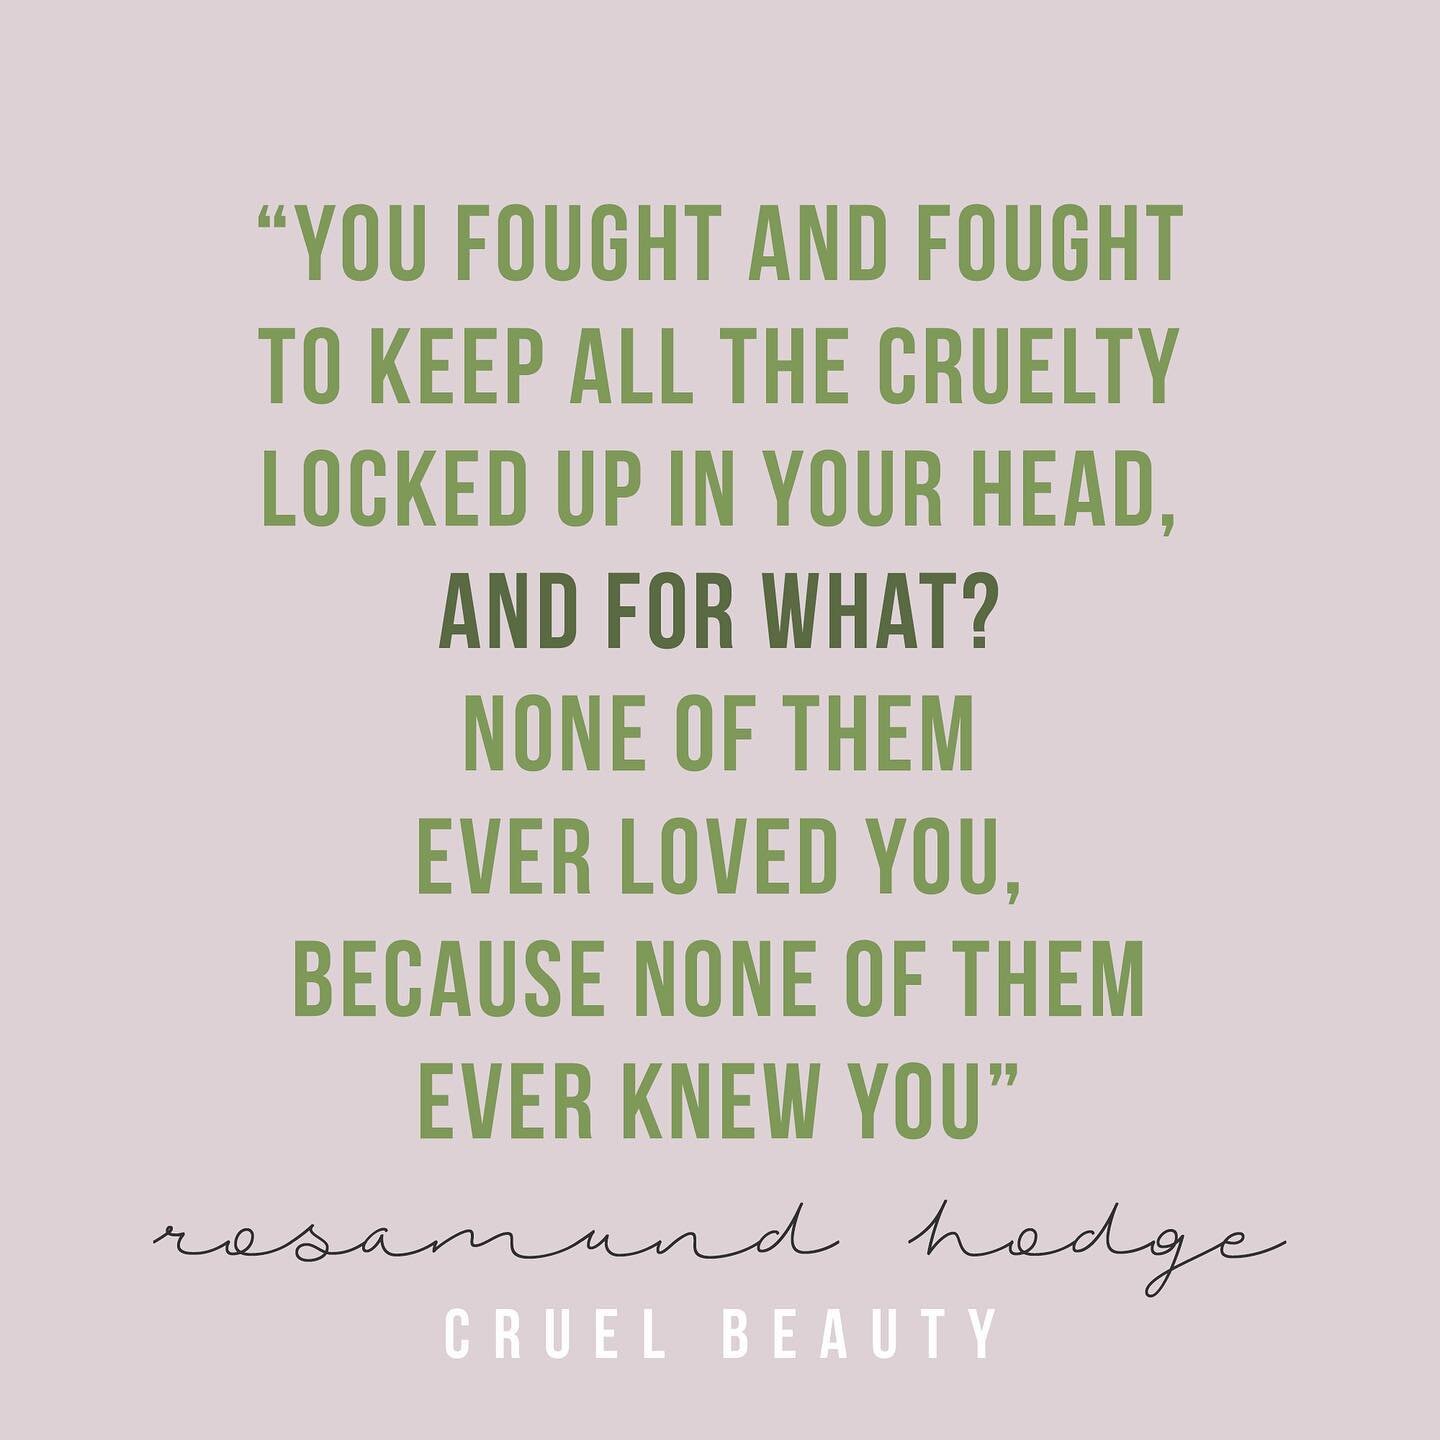 &quot;You fought and fought to keep all the cruelty locked up in your head, and for what? None of them ever loved you, because none of them ever knew you.&quot;
- Rosamund Hodge, Cruel Beauty
.
One of my absolute faves. This book is gorgeous, inside 